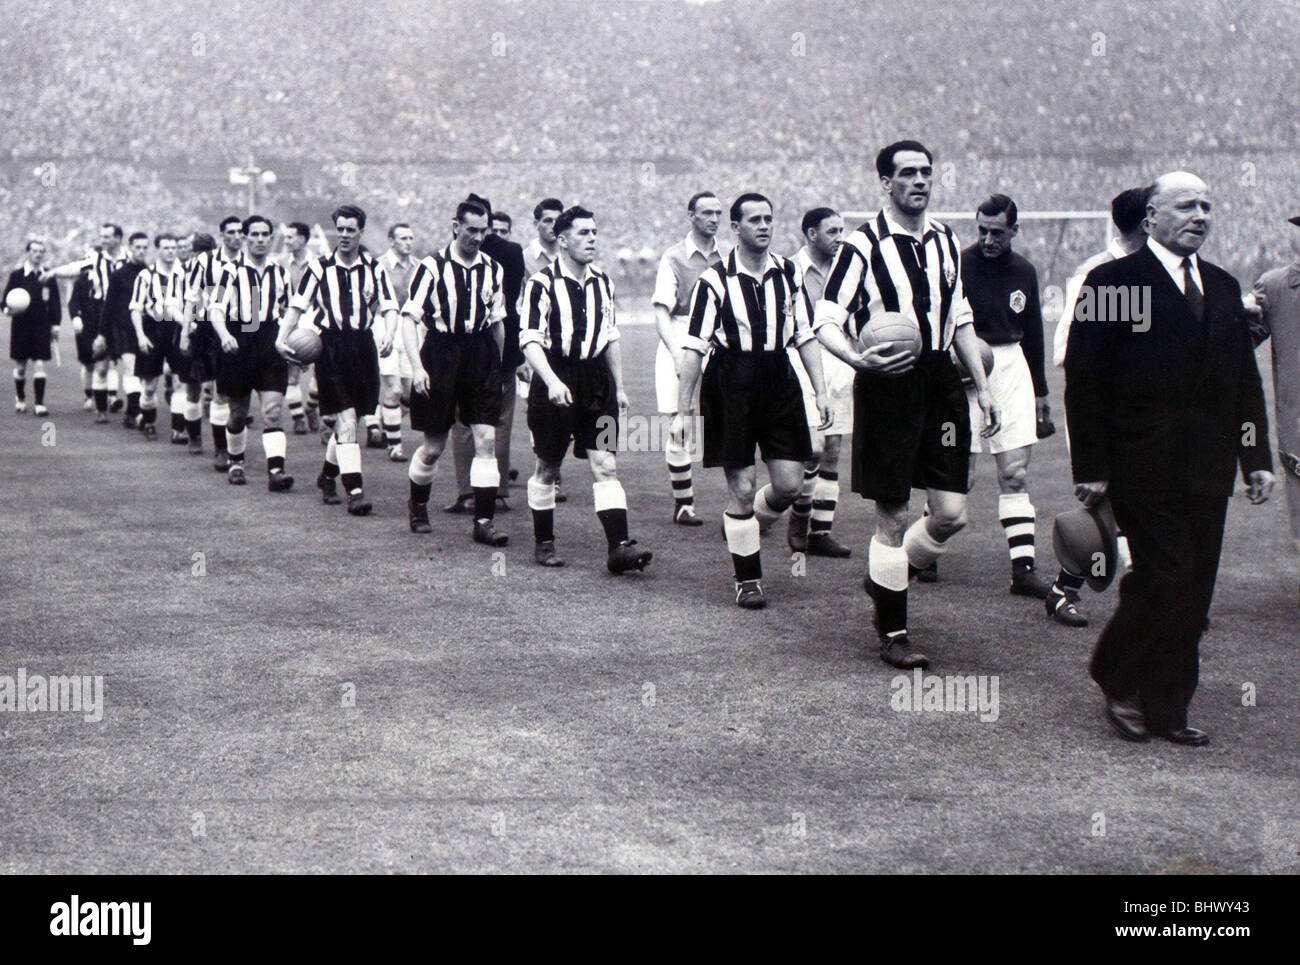 FA Cup Final 1952. Newcastle United vs Arsenal. 03/05/1952. The players walk out onto the famous Wembley pitch. The 1951/2 FA Cup run was one of the toughest imaginable. The Black ’n’ Whites met top sides Aston Villa, Tottenham, Portsmouth and Blackburn Rovers. And then they faced Arsenal at Wembley. Director-manager Stan Seymour leads out his team, followed by Bobby Cowell, Billy Foulkes, Jack Milburn, Bobby Mitchell (with the ball) and George Robledo. Stock Photo